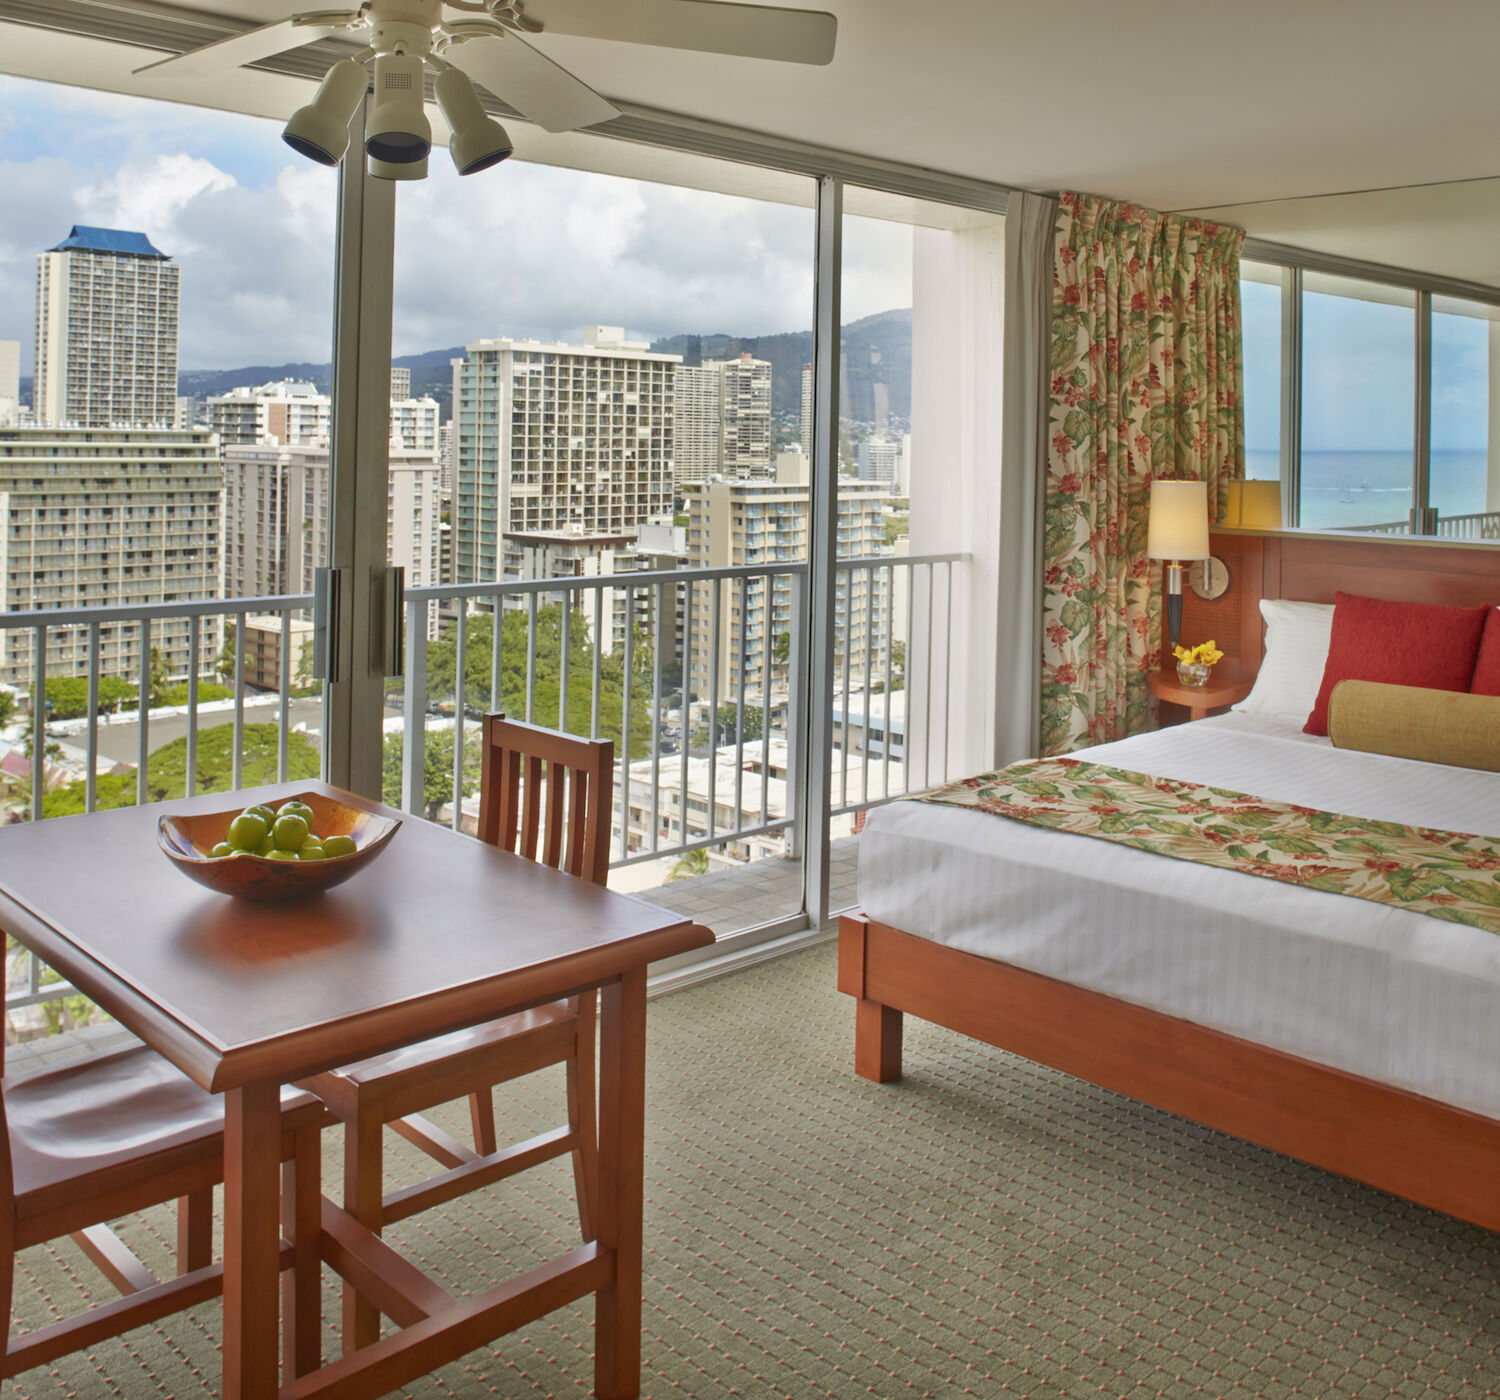 A cozy hotel room with a bed, small dining table, and large windows offering a stunning cityscape view of tall buildings and a glimpse of the ocean.